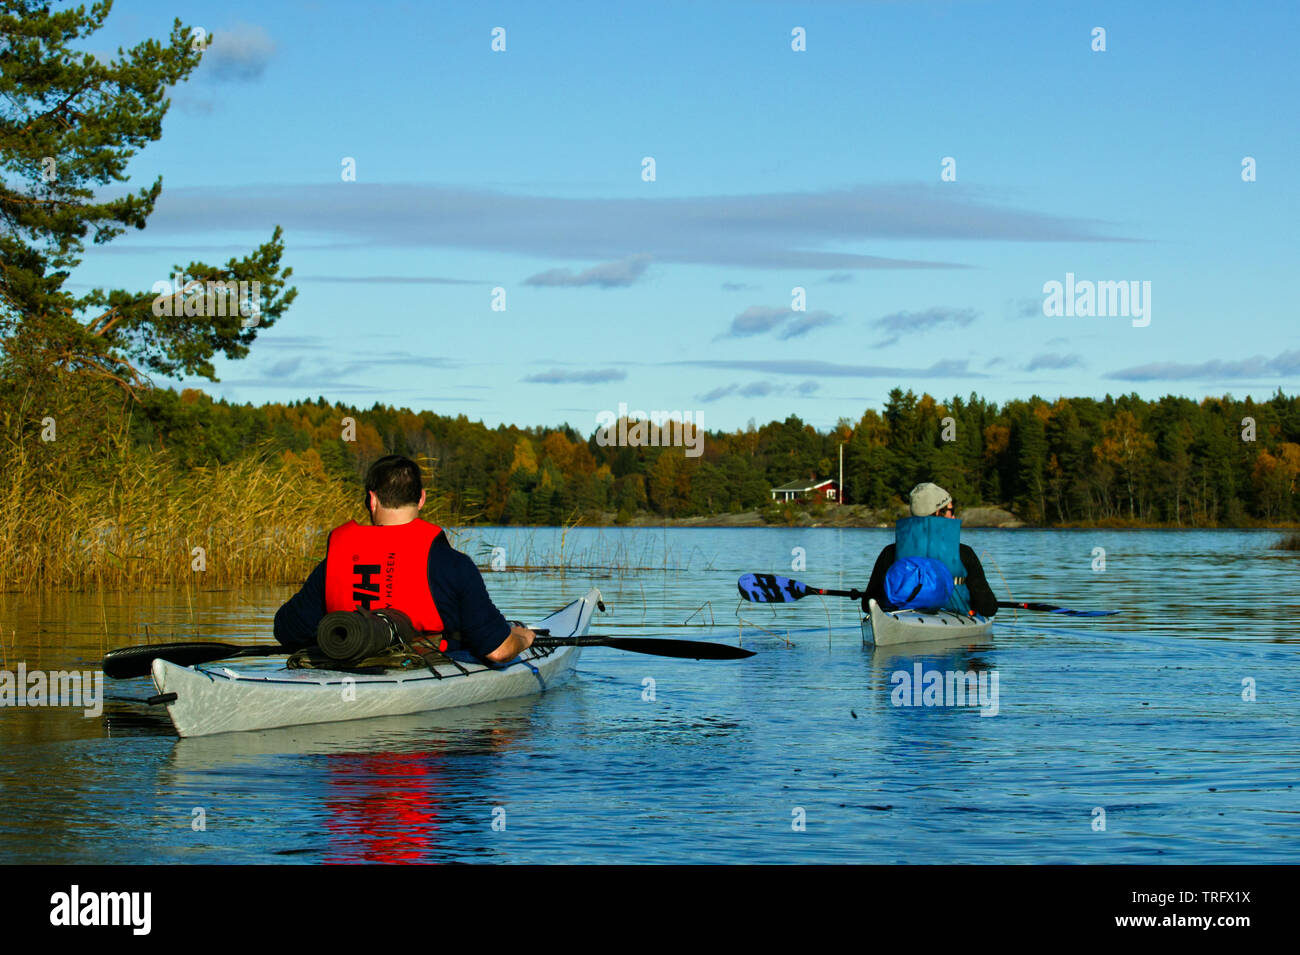 Two kayakers paddling on the lake Vansjø in Østfold, Norway. Vansjø is the largest lake in Østfold. Vansjø and its surrounding lakes and rivers are a part of the water system called Morsavassdraget. October, 2004. Stock Photo